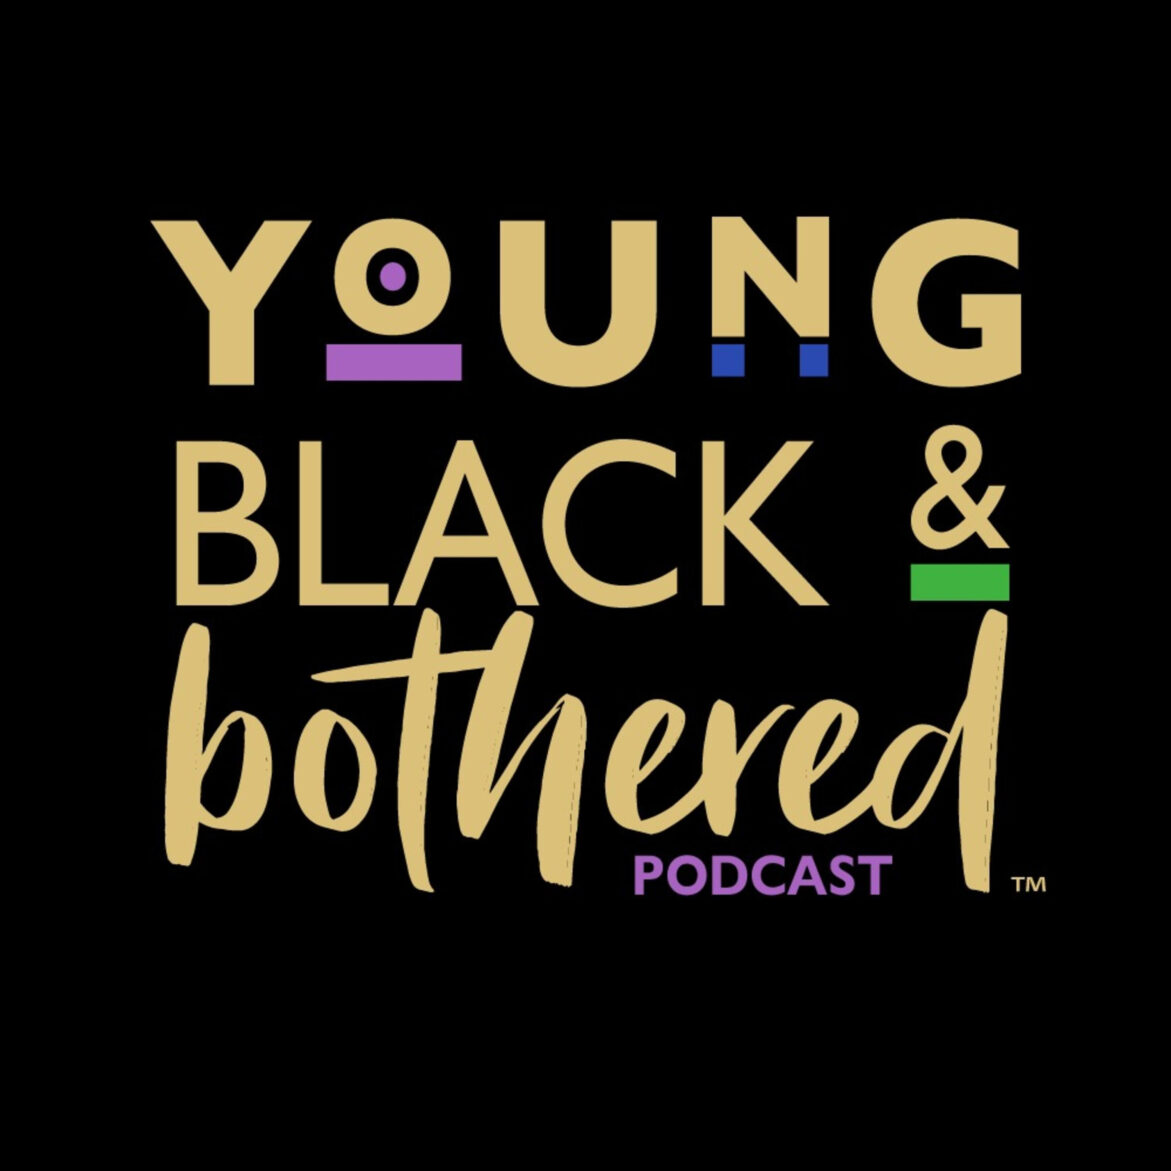 Black Podcasting - 92: I Told Your Face What I Want